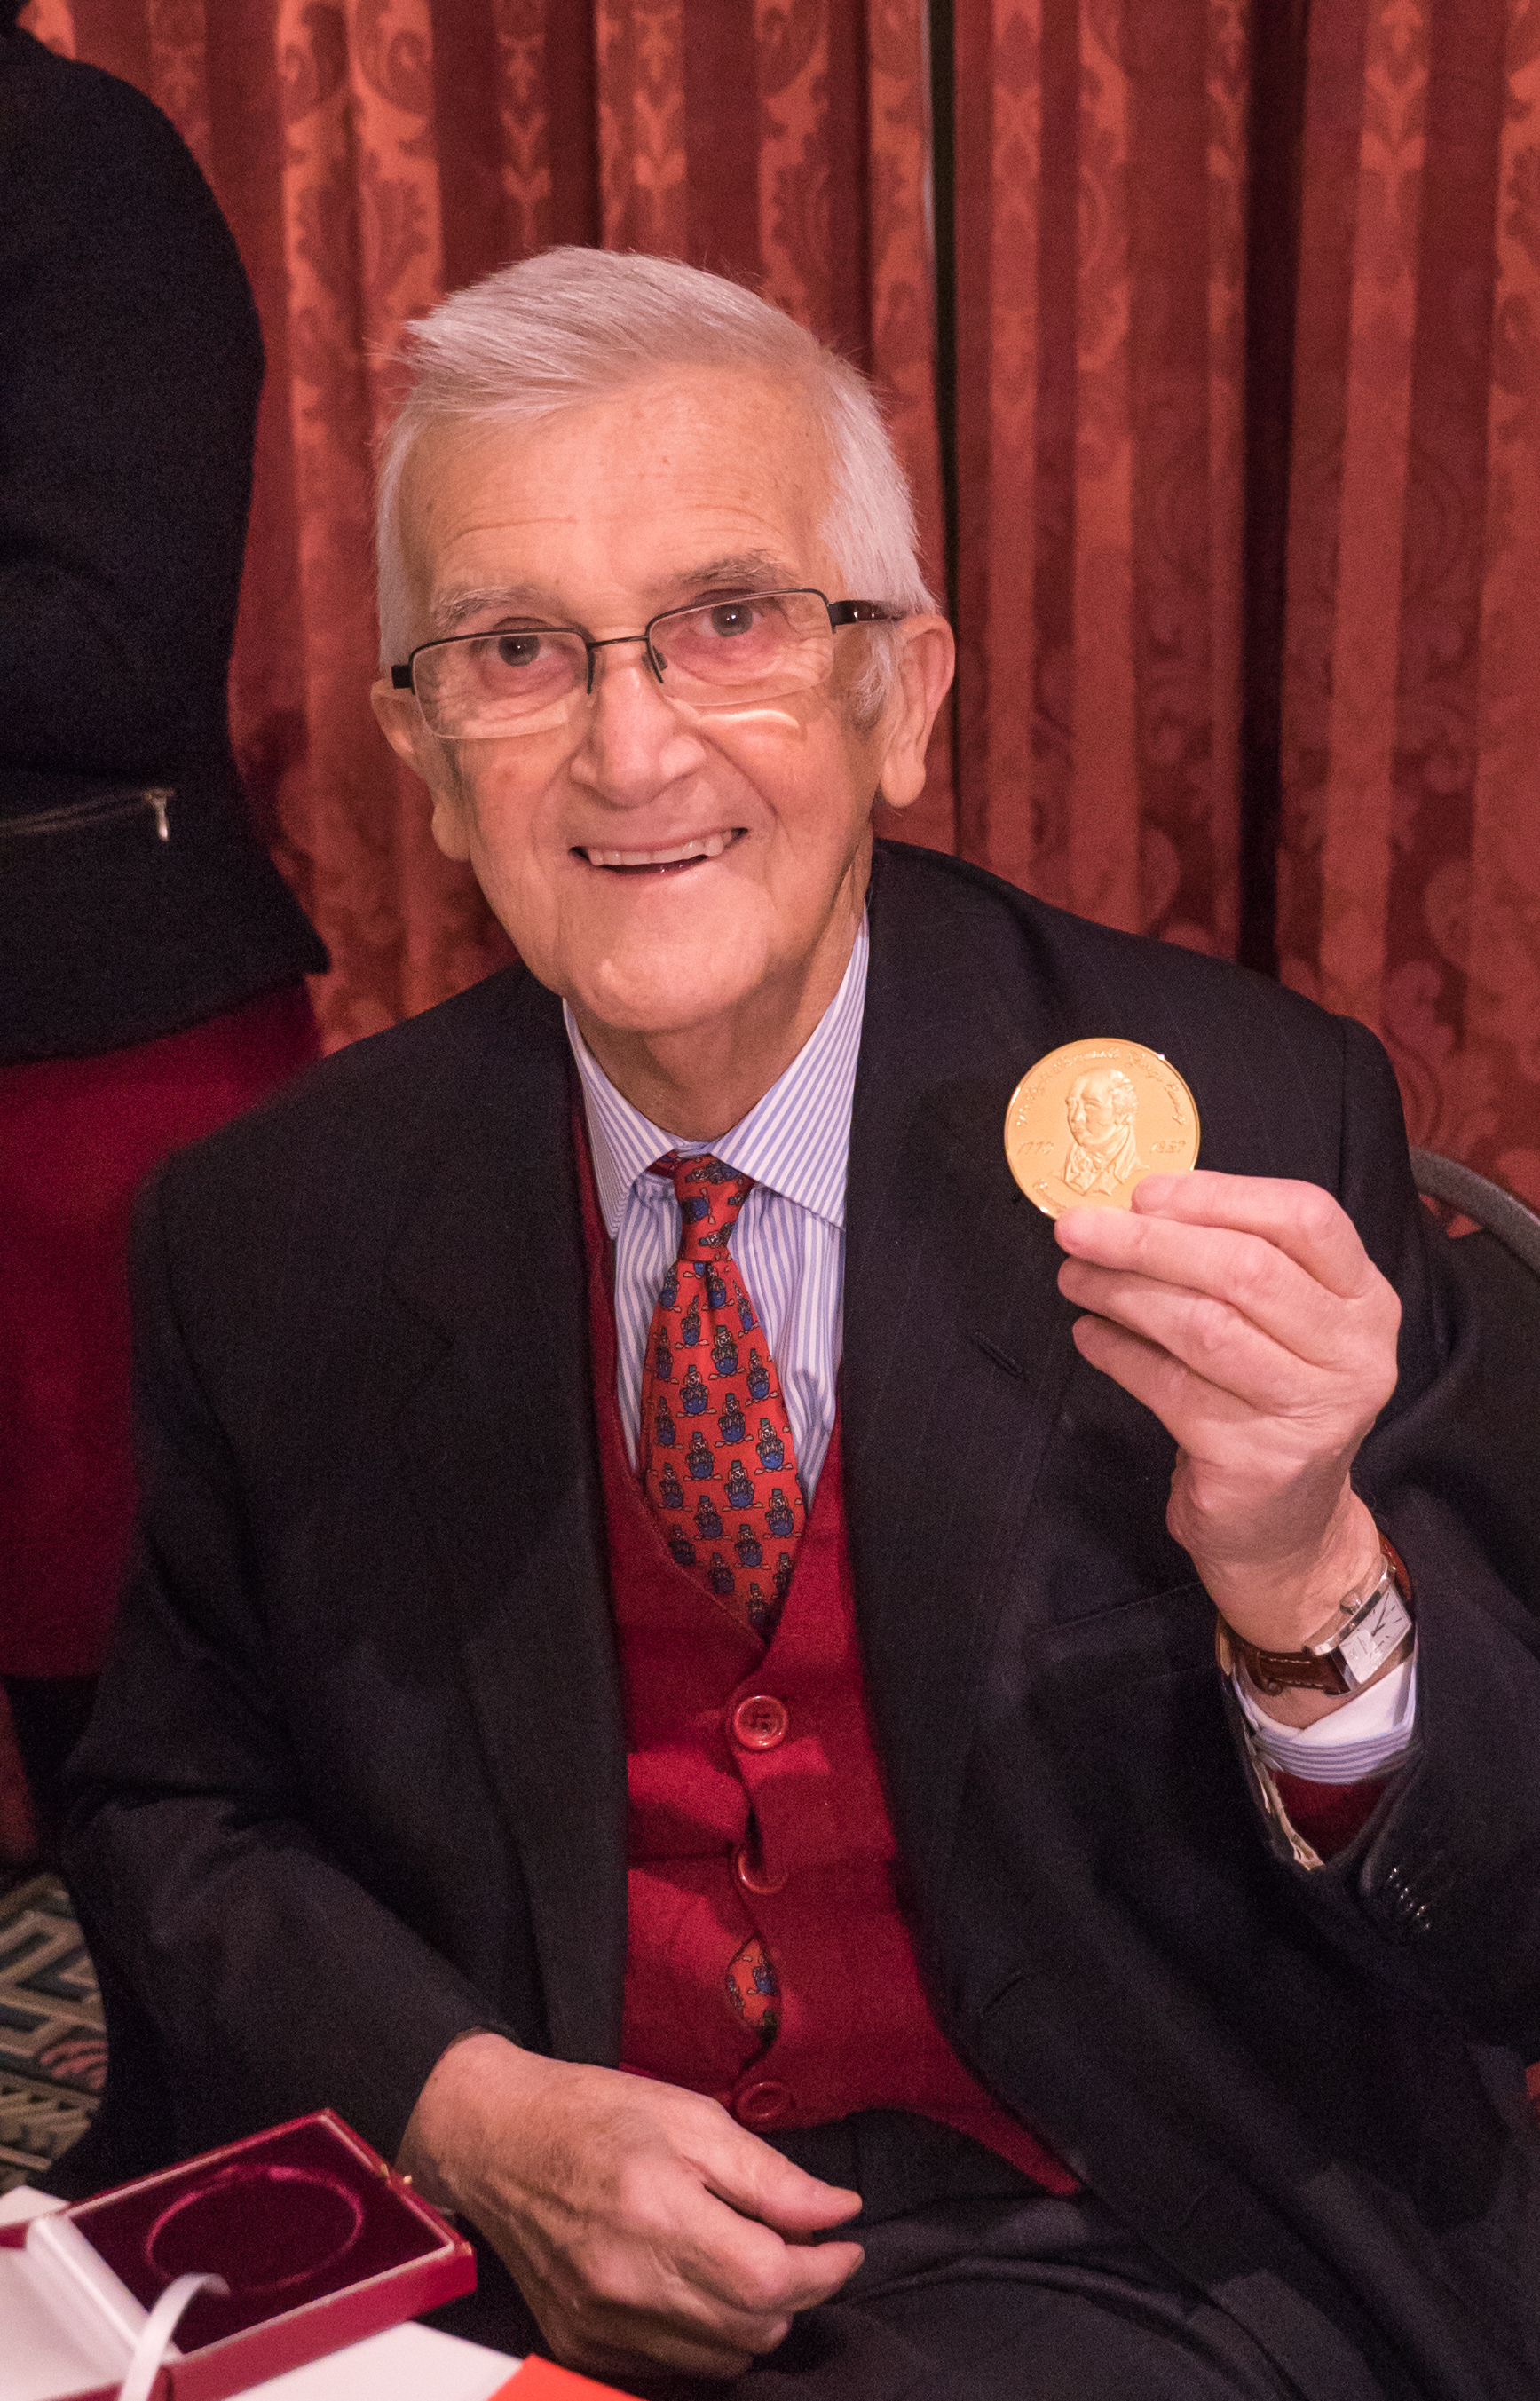 Lord Garel-Jones receives his Canning Medal, 2018